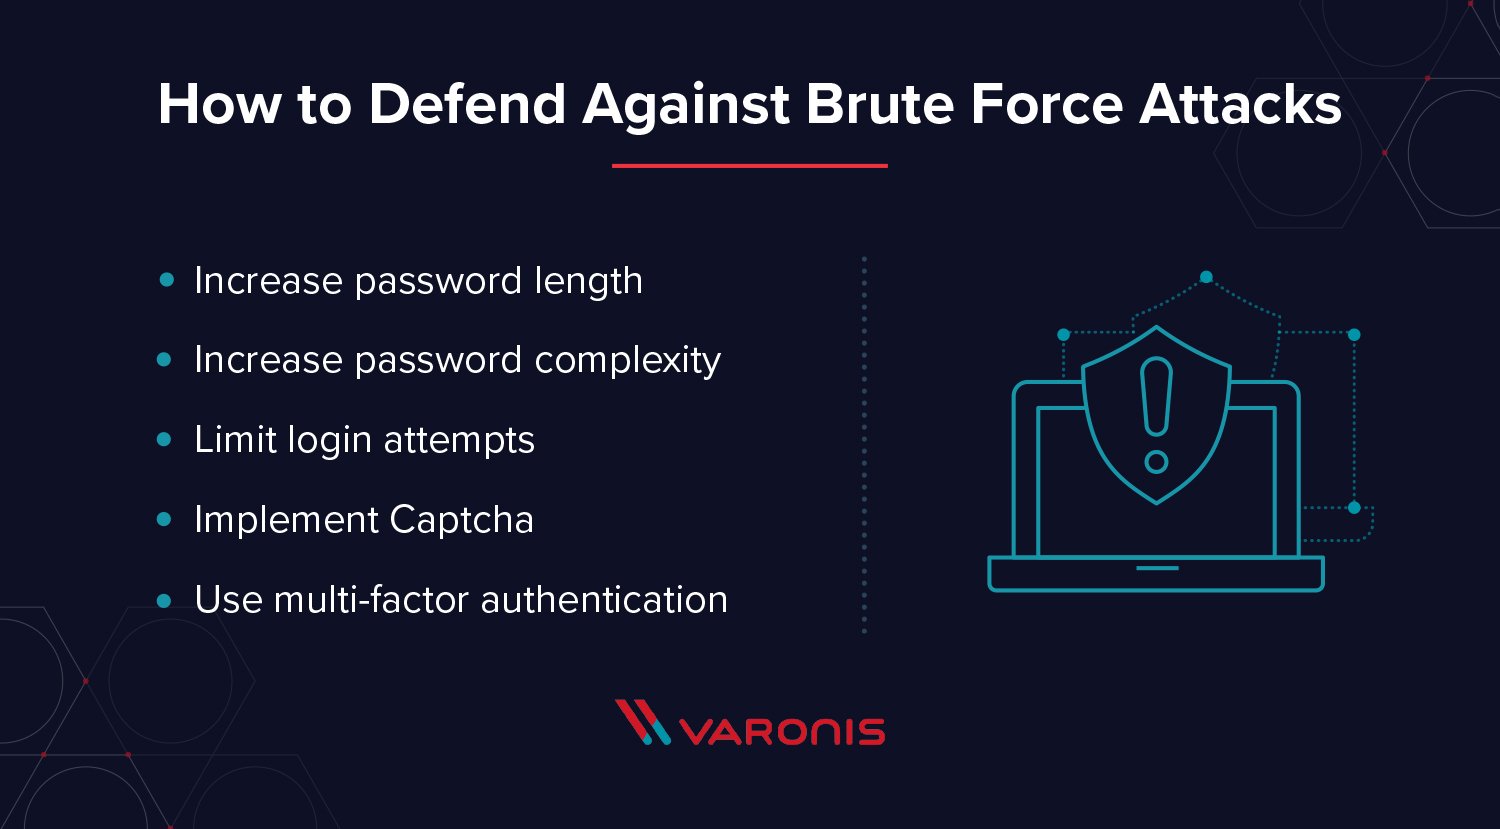 How to Defend Against Brute Force Attacks